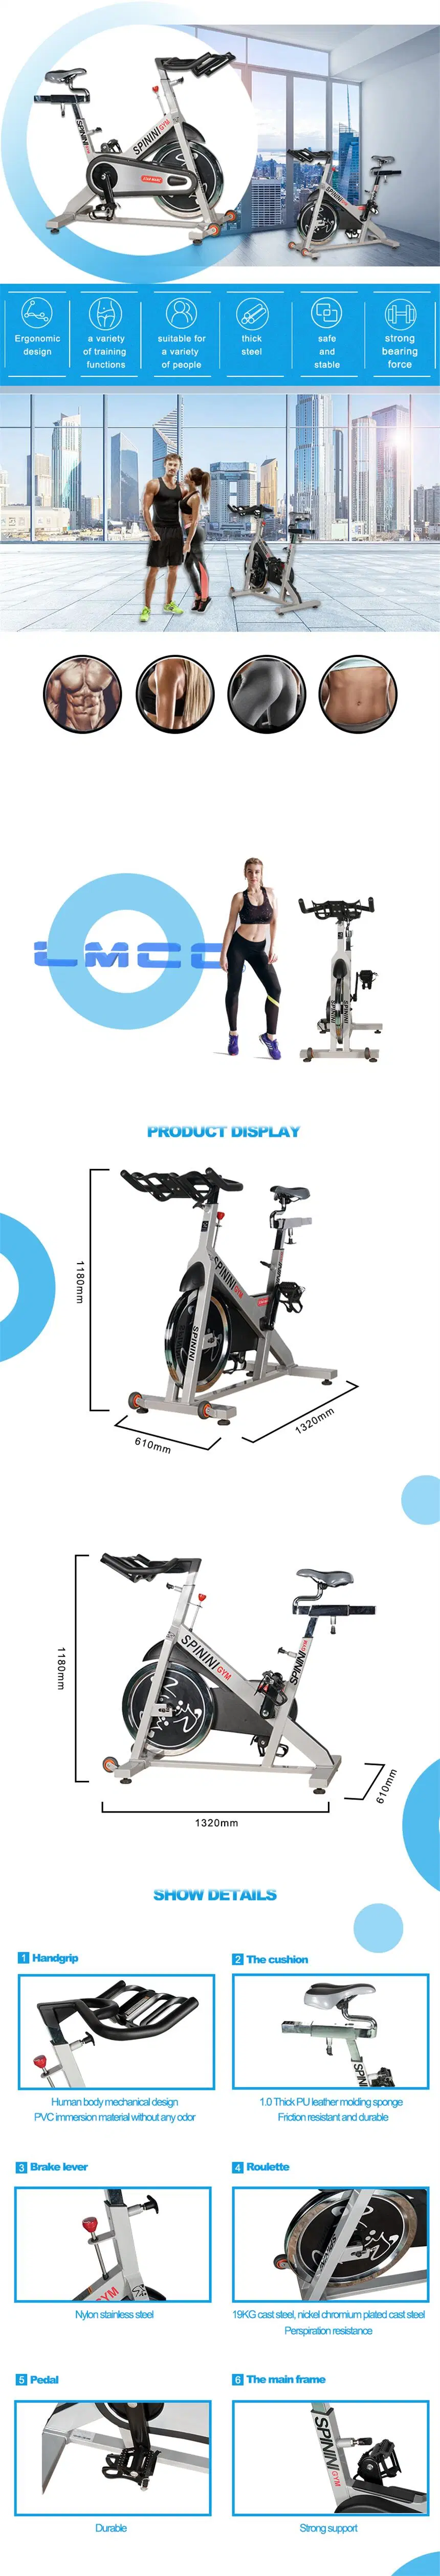 Leenkon Commercial Gym Club Use Fitness Cardio Schwinn Magnetic Spin Bikes Movable Spinning Bike